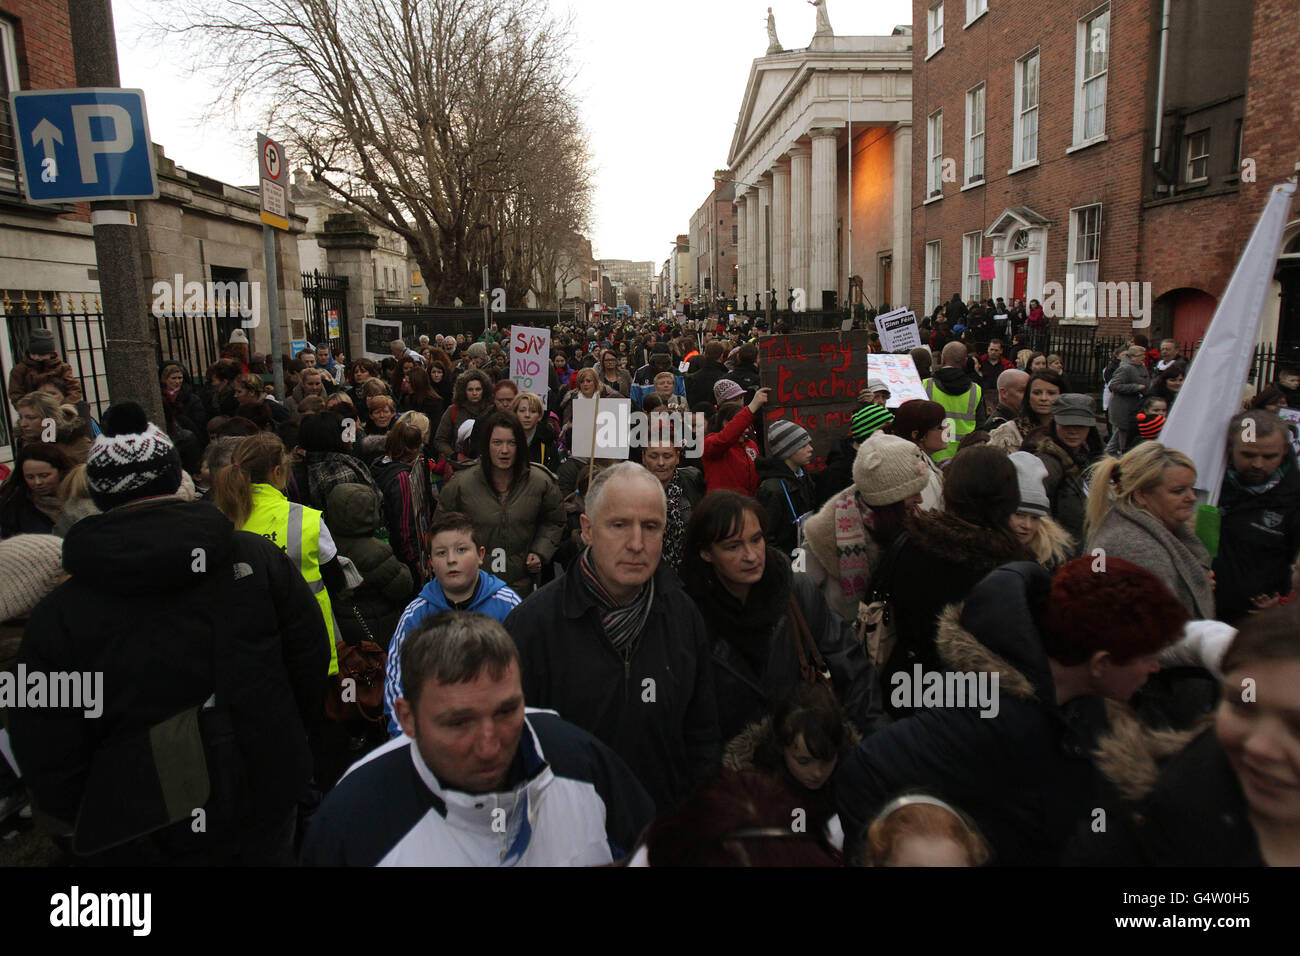 Some of the thousands of teachers and school children from Dublin's disadvantaged schools (DEIS - Delivering Equality of Opportunity in Schools), protest outside the Department of Education in Marlborough Street, Dublin. Stock Photo